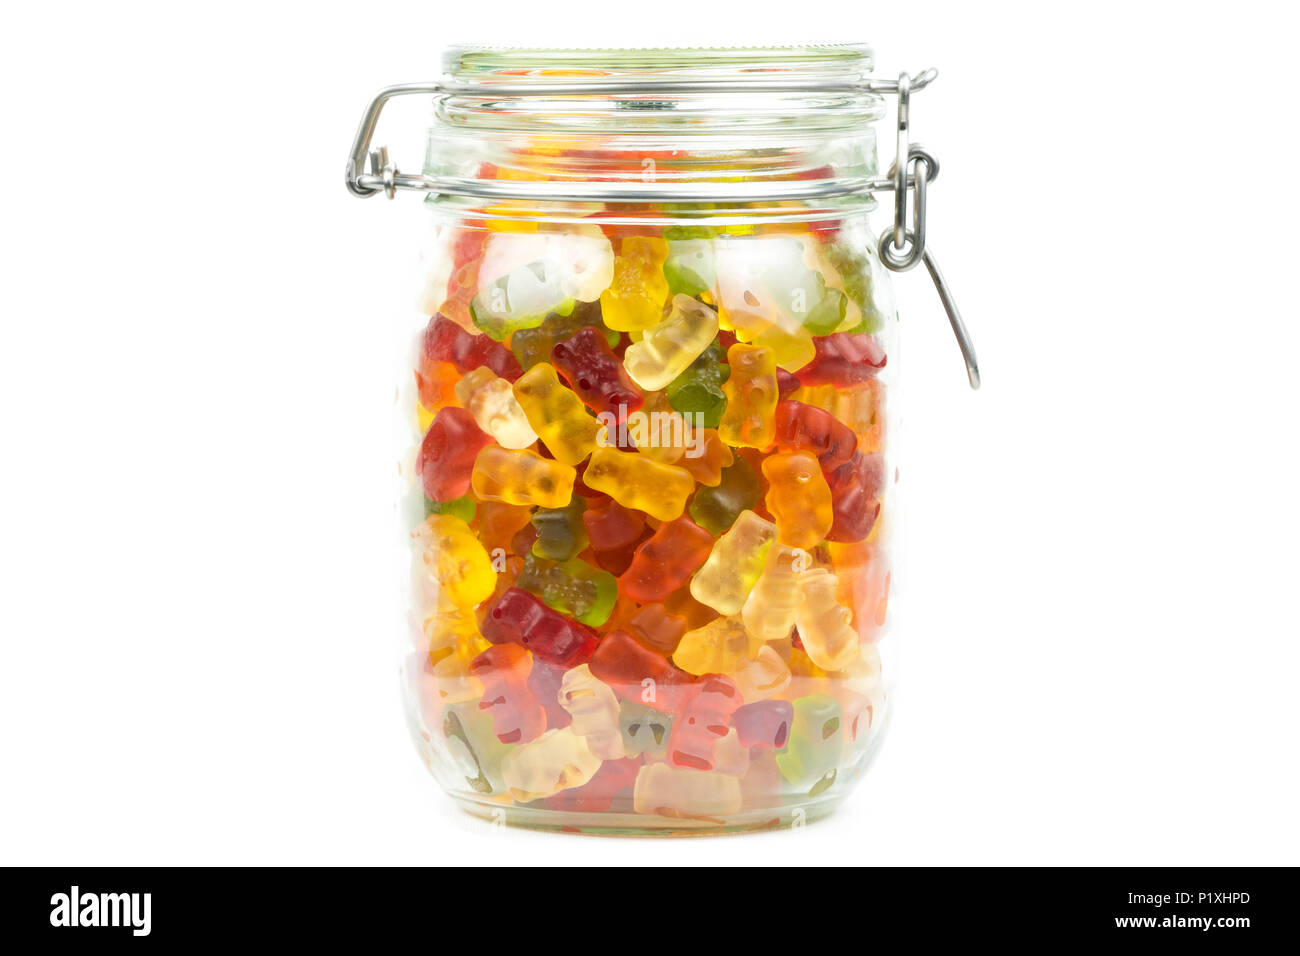 Colourful gummy bears / jelly baby candy sweets in a glass jar on a white background Stock Photo